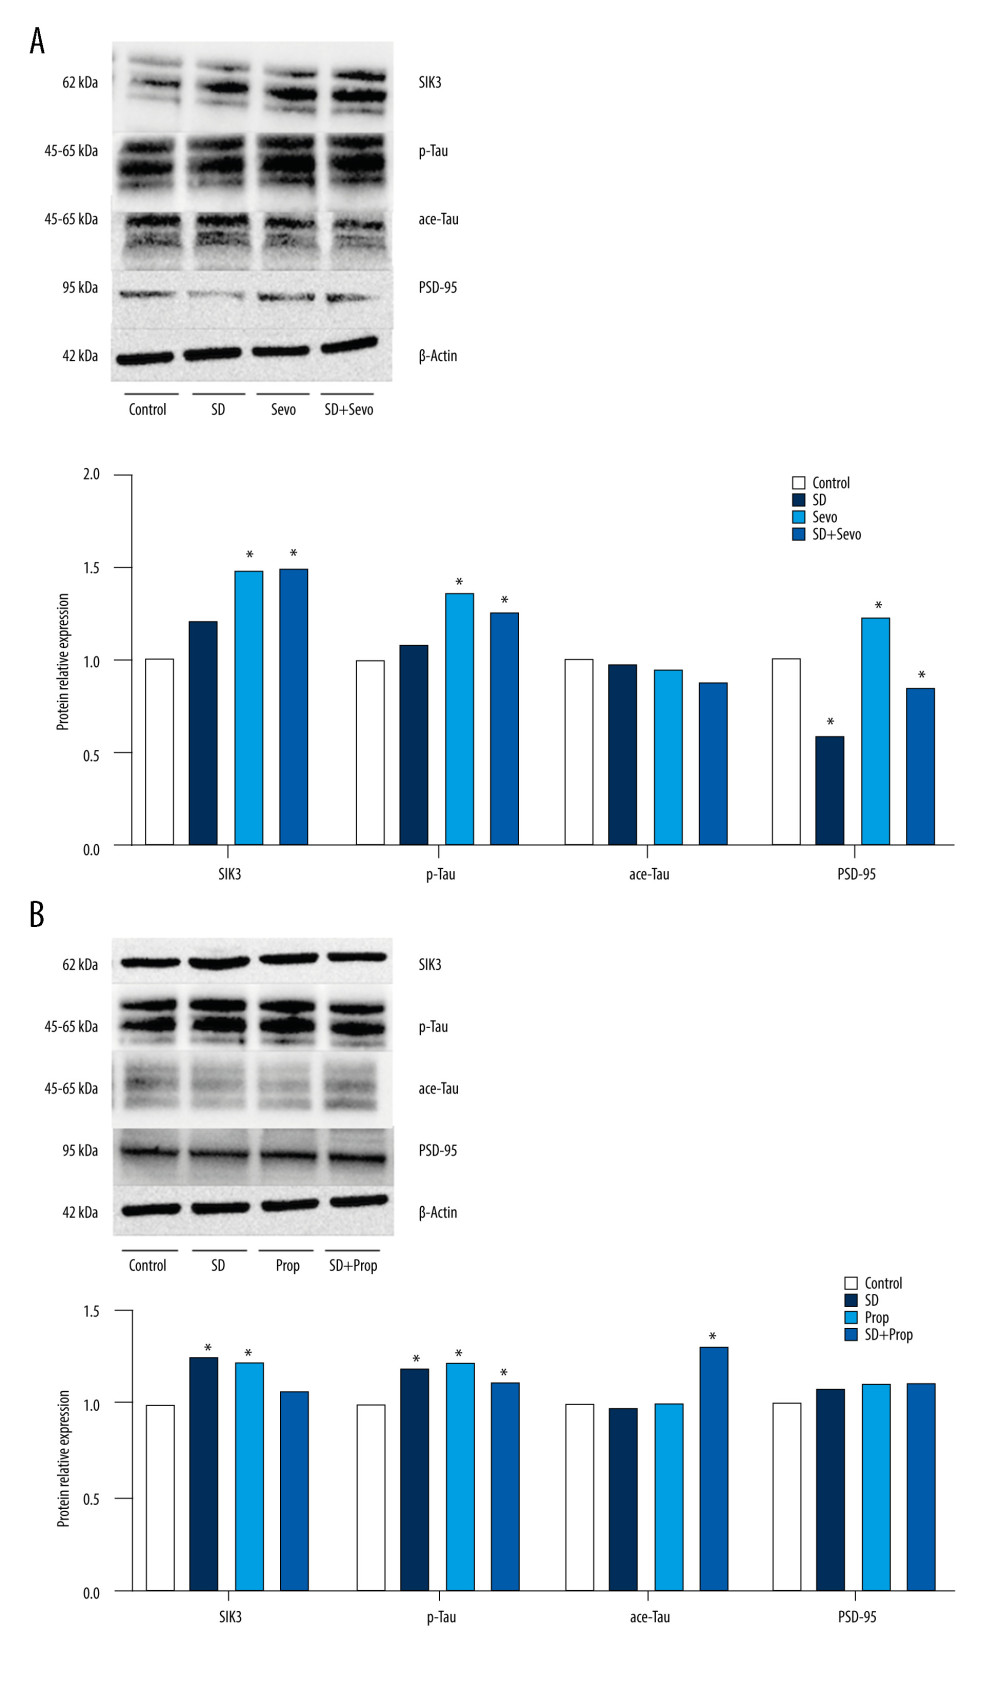 (A, B) Expression of SIK3, PSD-95 and proteins associated with tau modification after administration of tau agonist in ratsIntravenous anesthesia with propofol reversed cognitive impairment caused by acute sleep deprivation. In the Control group, the expression level of tau protein in the hippocampus of the SD group was upregulated (P<0.05), the expression level of tau protein phosphorylation (Ser404) was significantly upregulated (P<0.05), and the acetylation level was decreased (P<0.05), together with the decrease in postsynaptic PSD95. There was no significant difference in each protein’s levels between the Prop group and the Control group (P>0.05). The SD+Prop group outperformed the SD group in cognition, and the results were statistically significant (* P<0.05 Con vs SD, Control vs Prop, and SD vs SD+Prop).